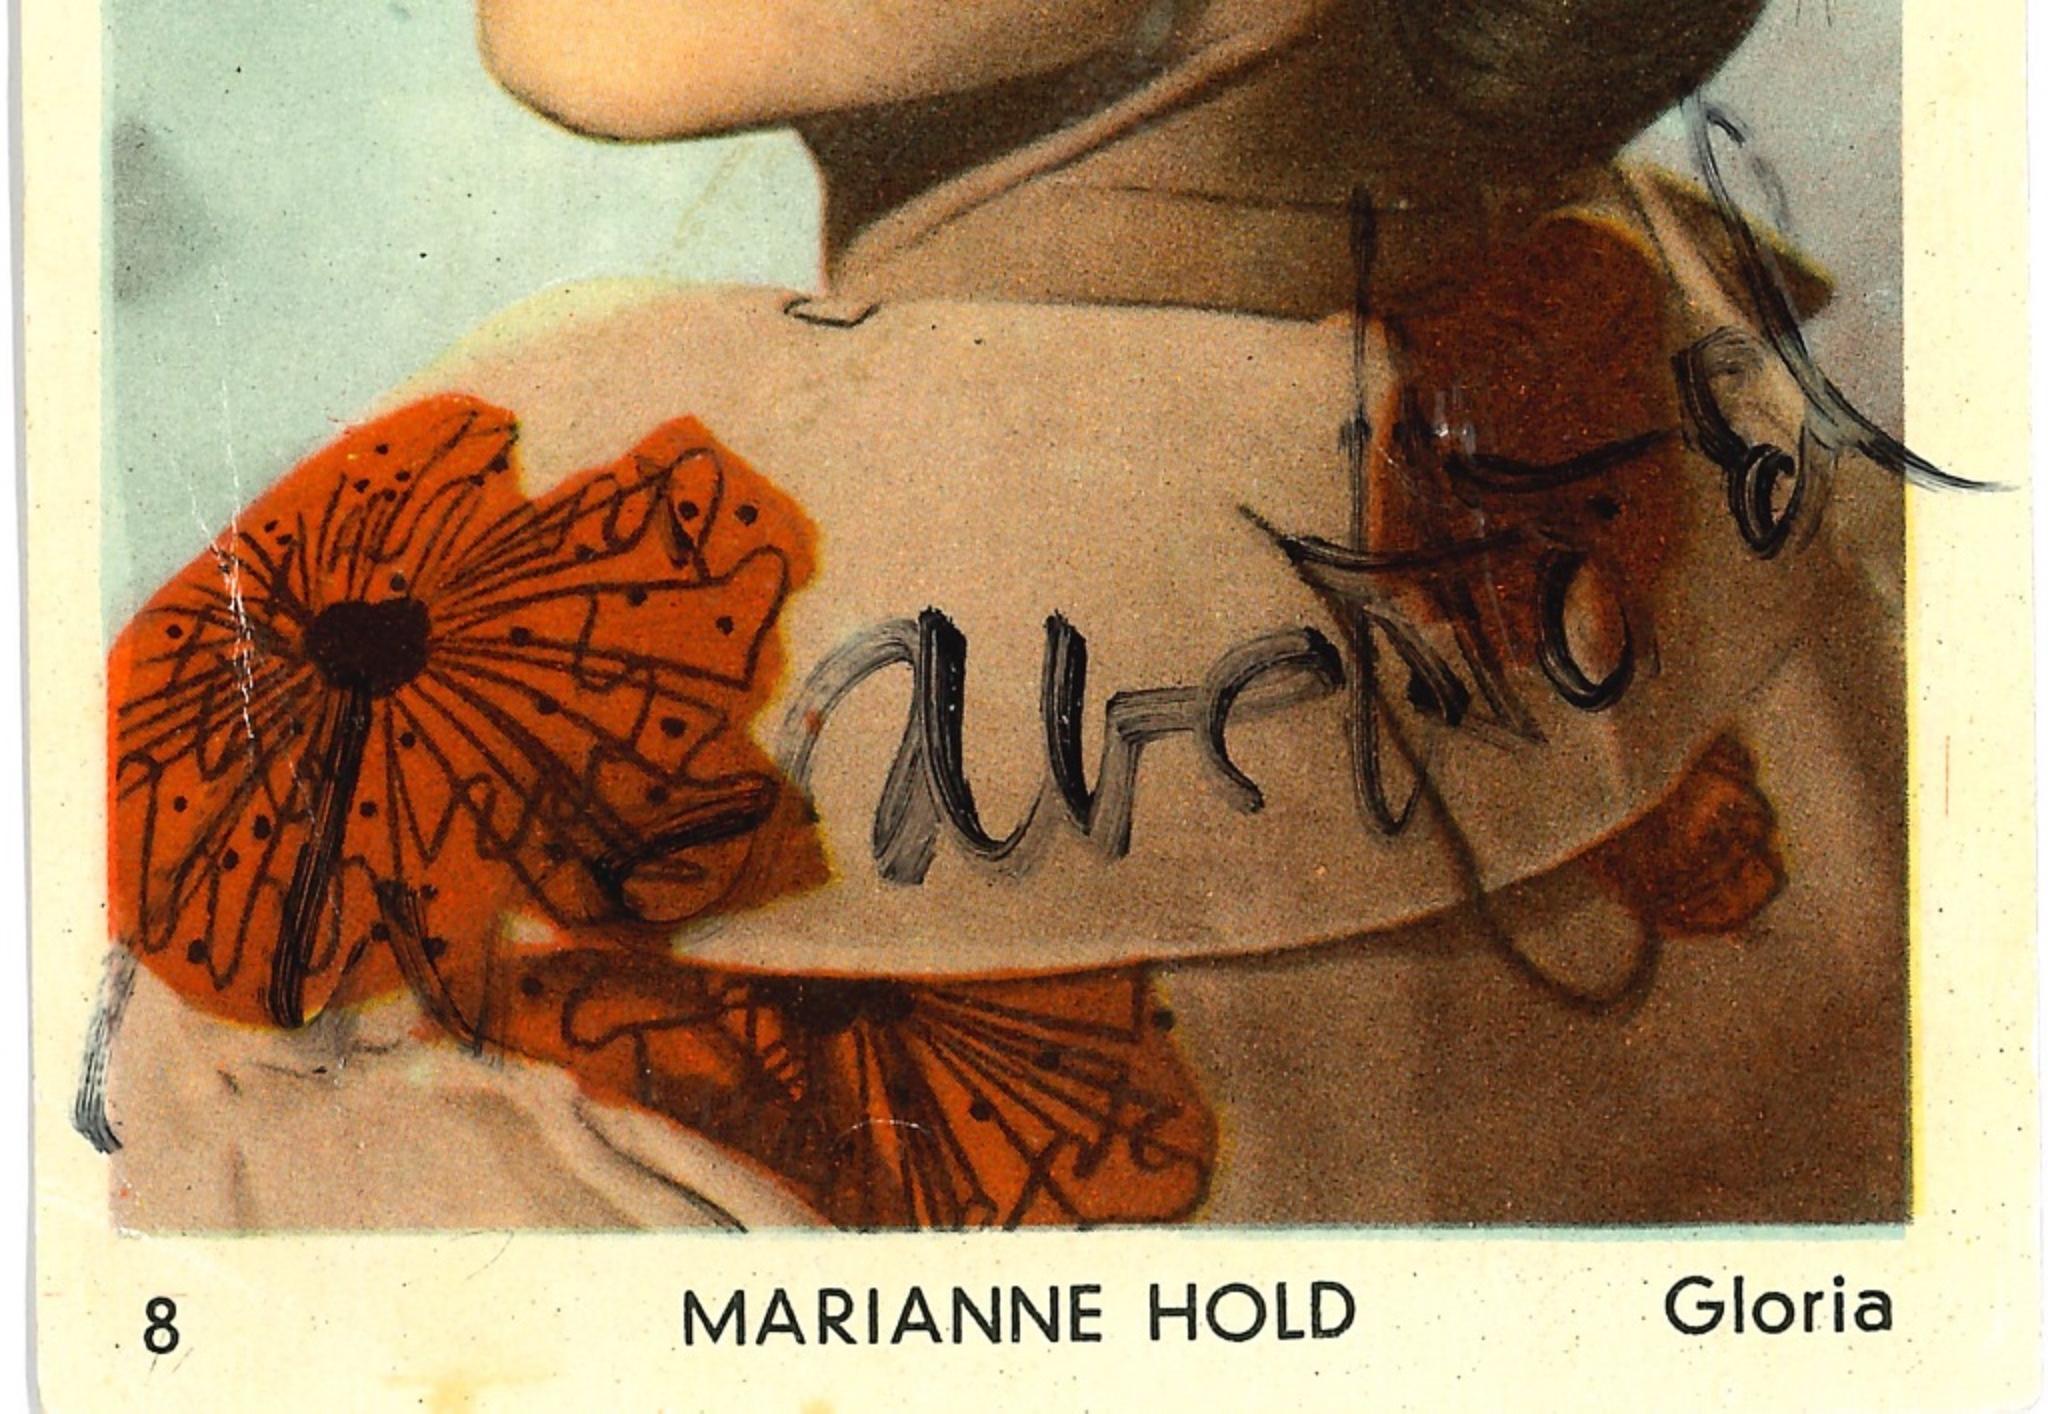 Autographed Portrait of Marianne Hold - 1960s - Photograph by Unknown